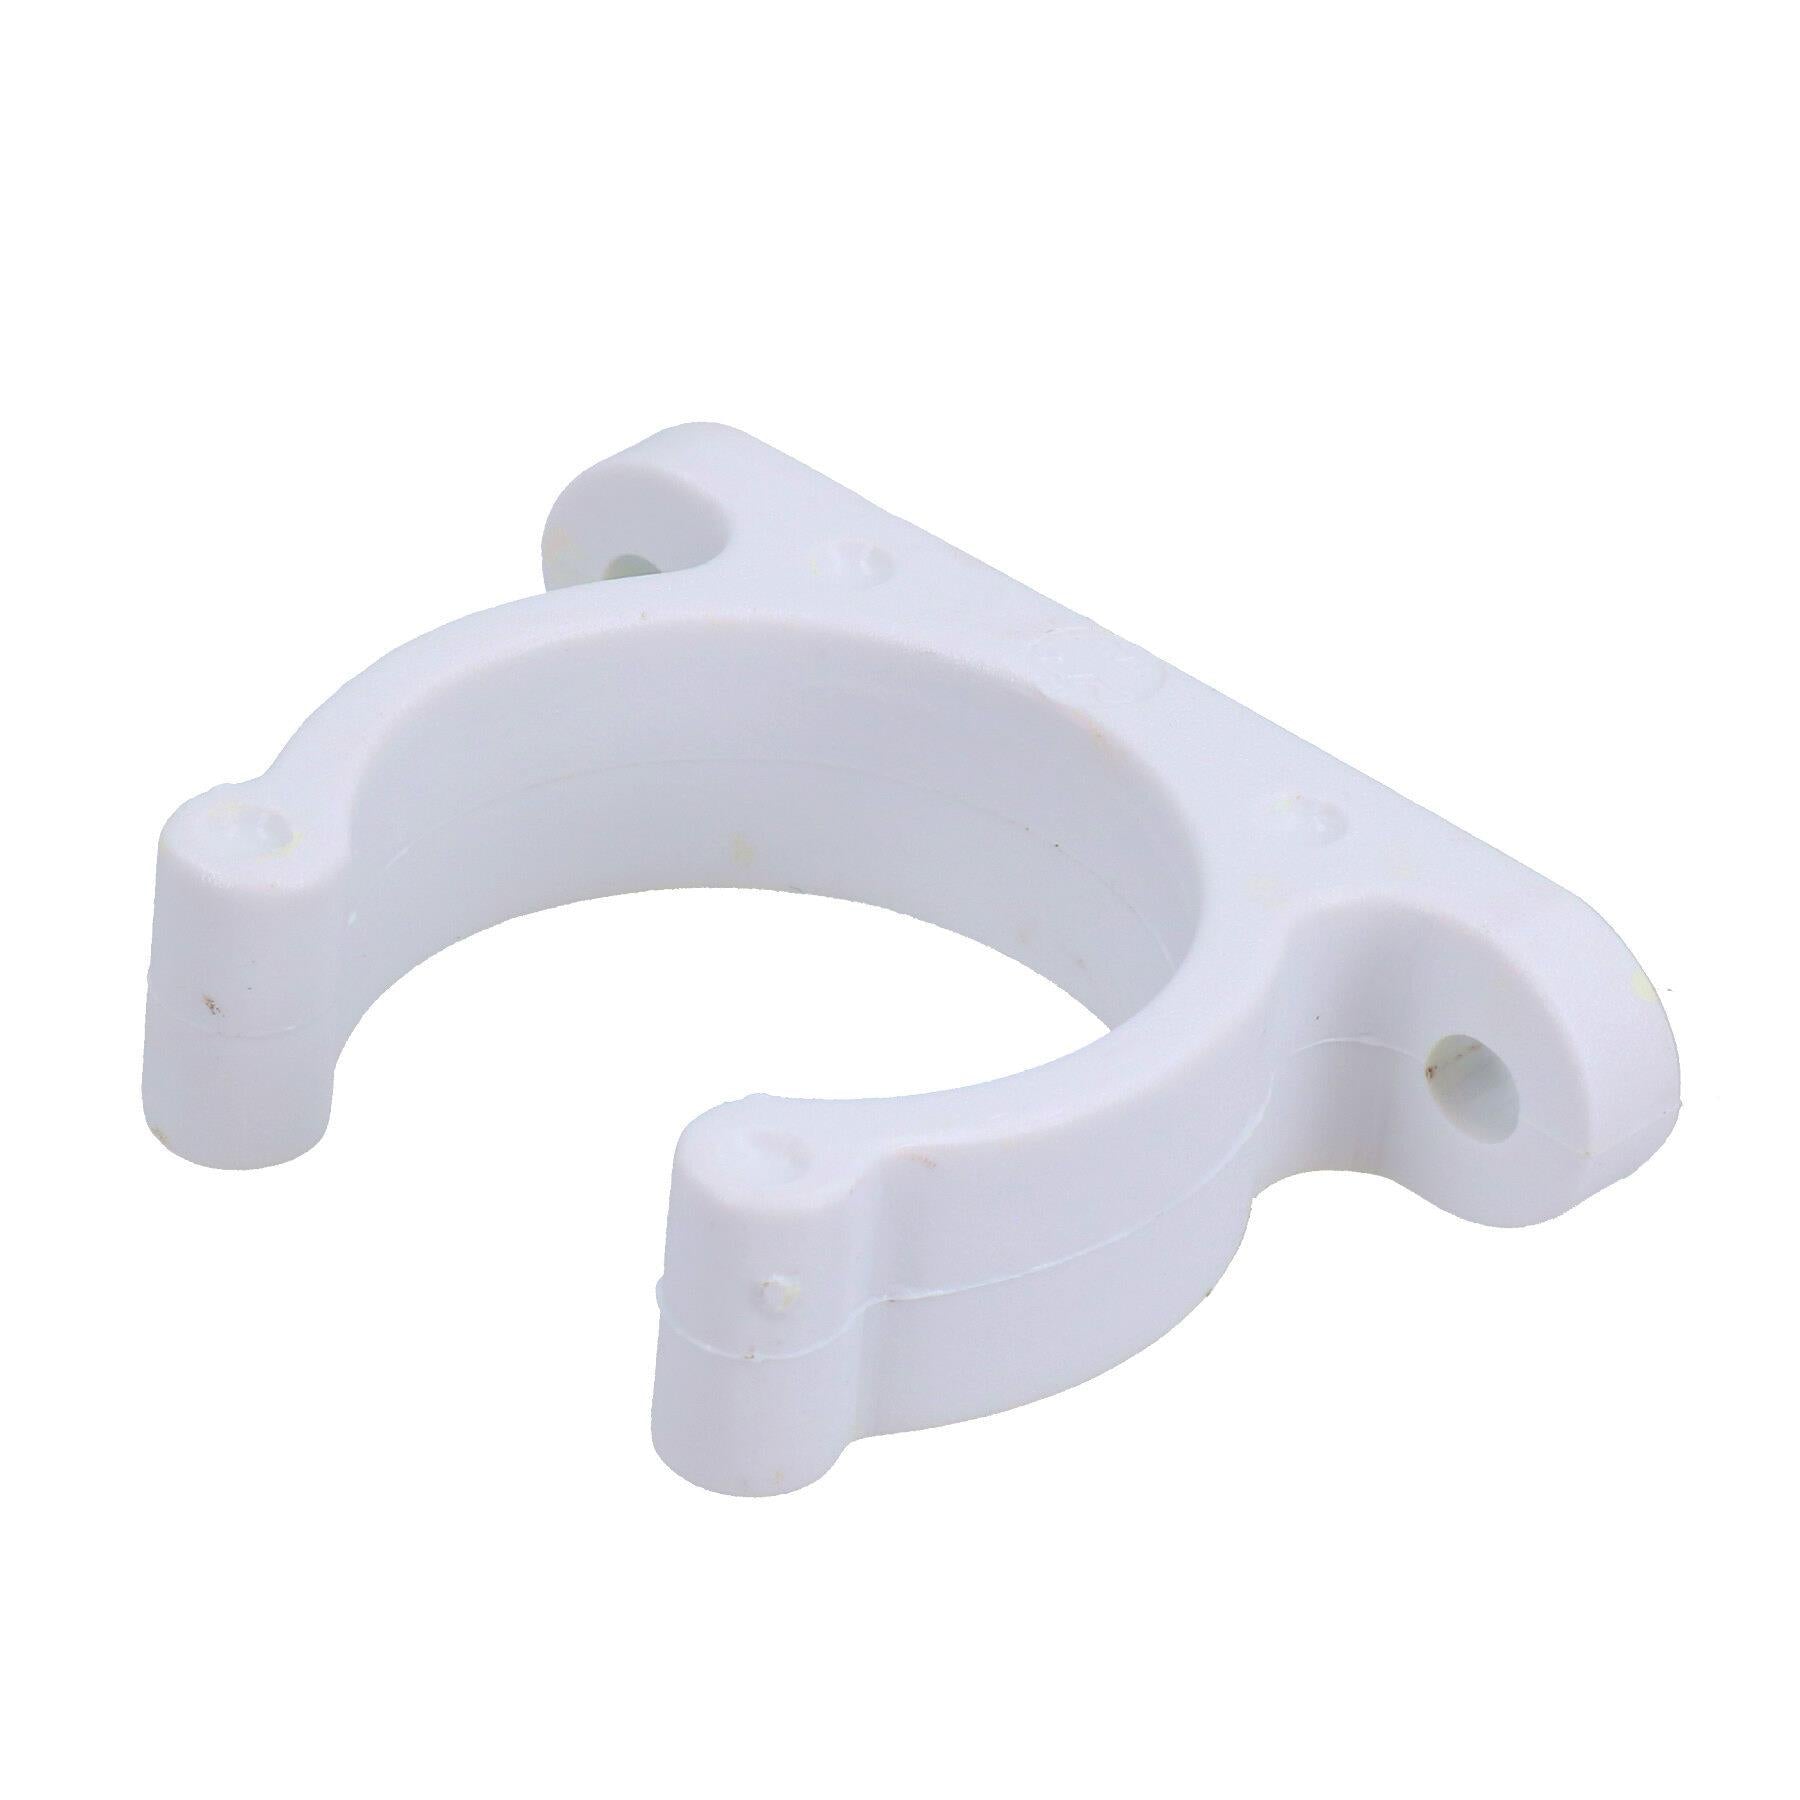 15mm Polyamide Tube Storage Clips Paddle Boat Hook Pole Tool by Plastimo